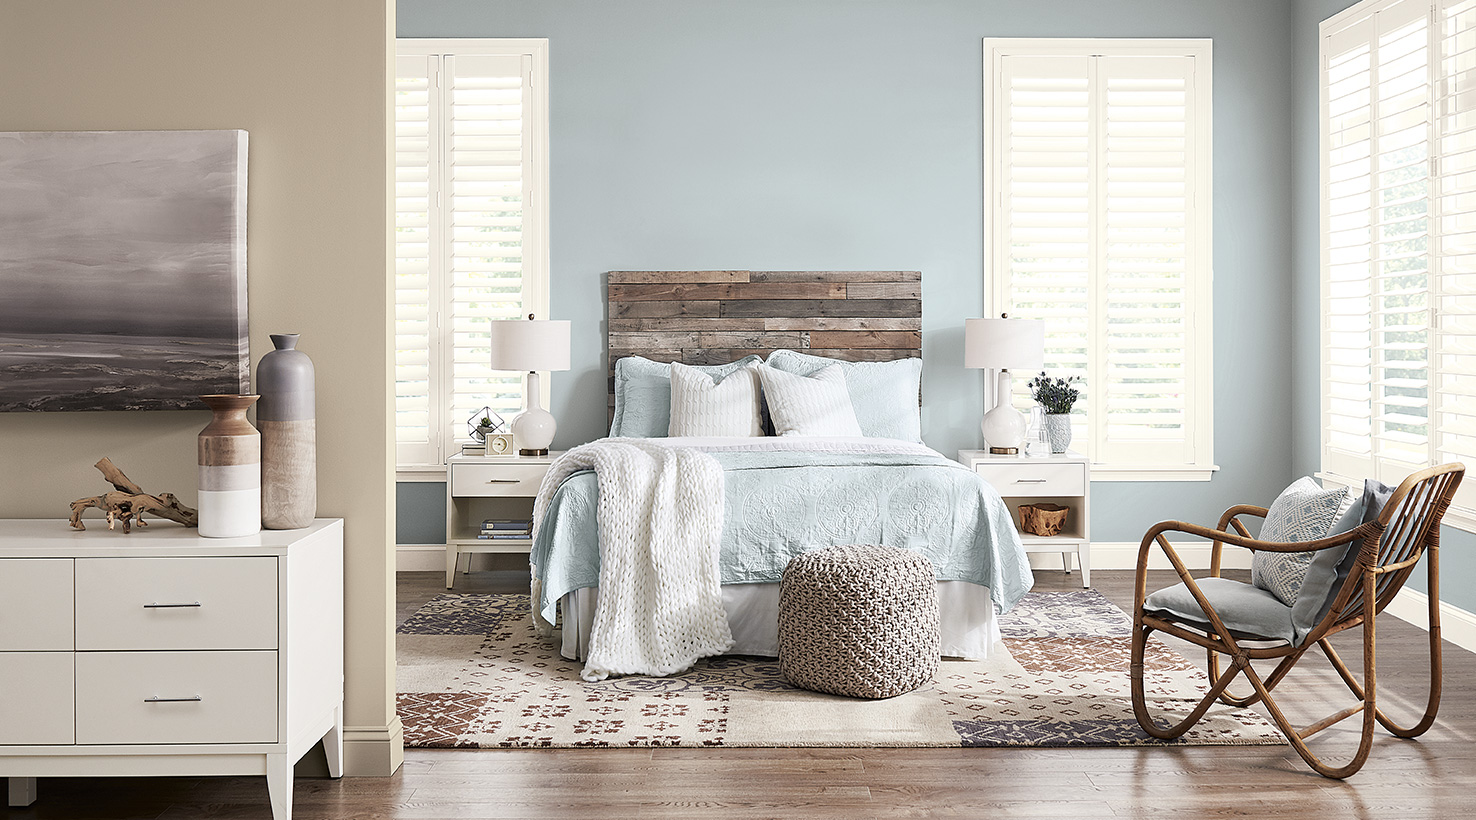 Bedroom Paint Color Ideas Inspiration Gallery Sherwin Williams